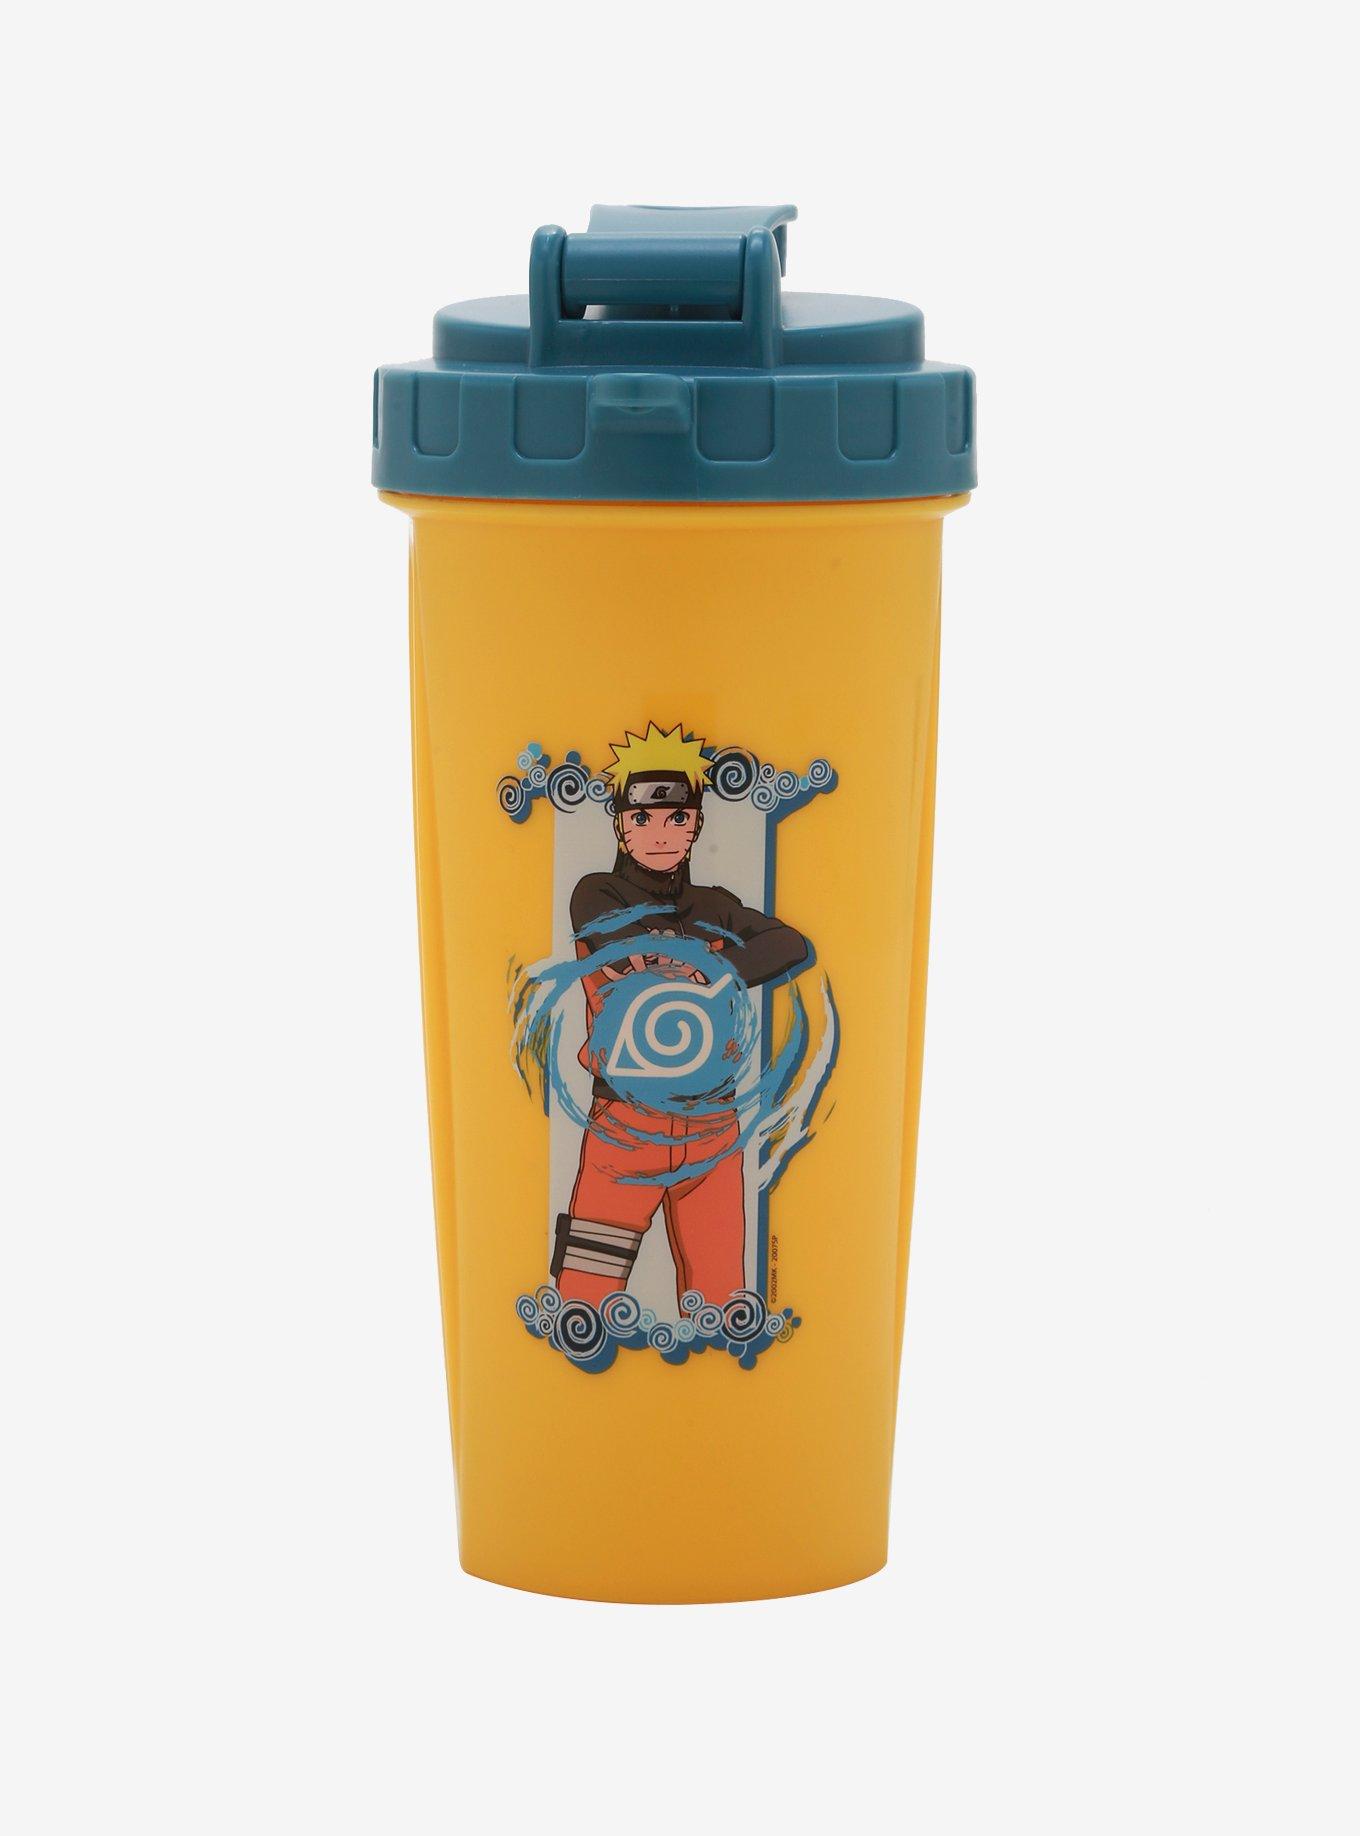 Official Licensed Naruto Shippuden Shaker Bottle THE WILL ON FIRE [CLEAR  20oz] Anime Shaker Bottle, Gymnastic Shaker/Water Bottle for Adults